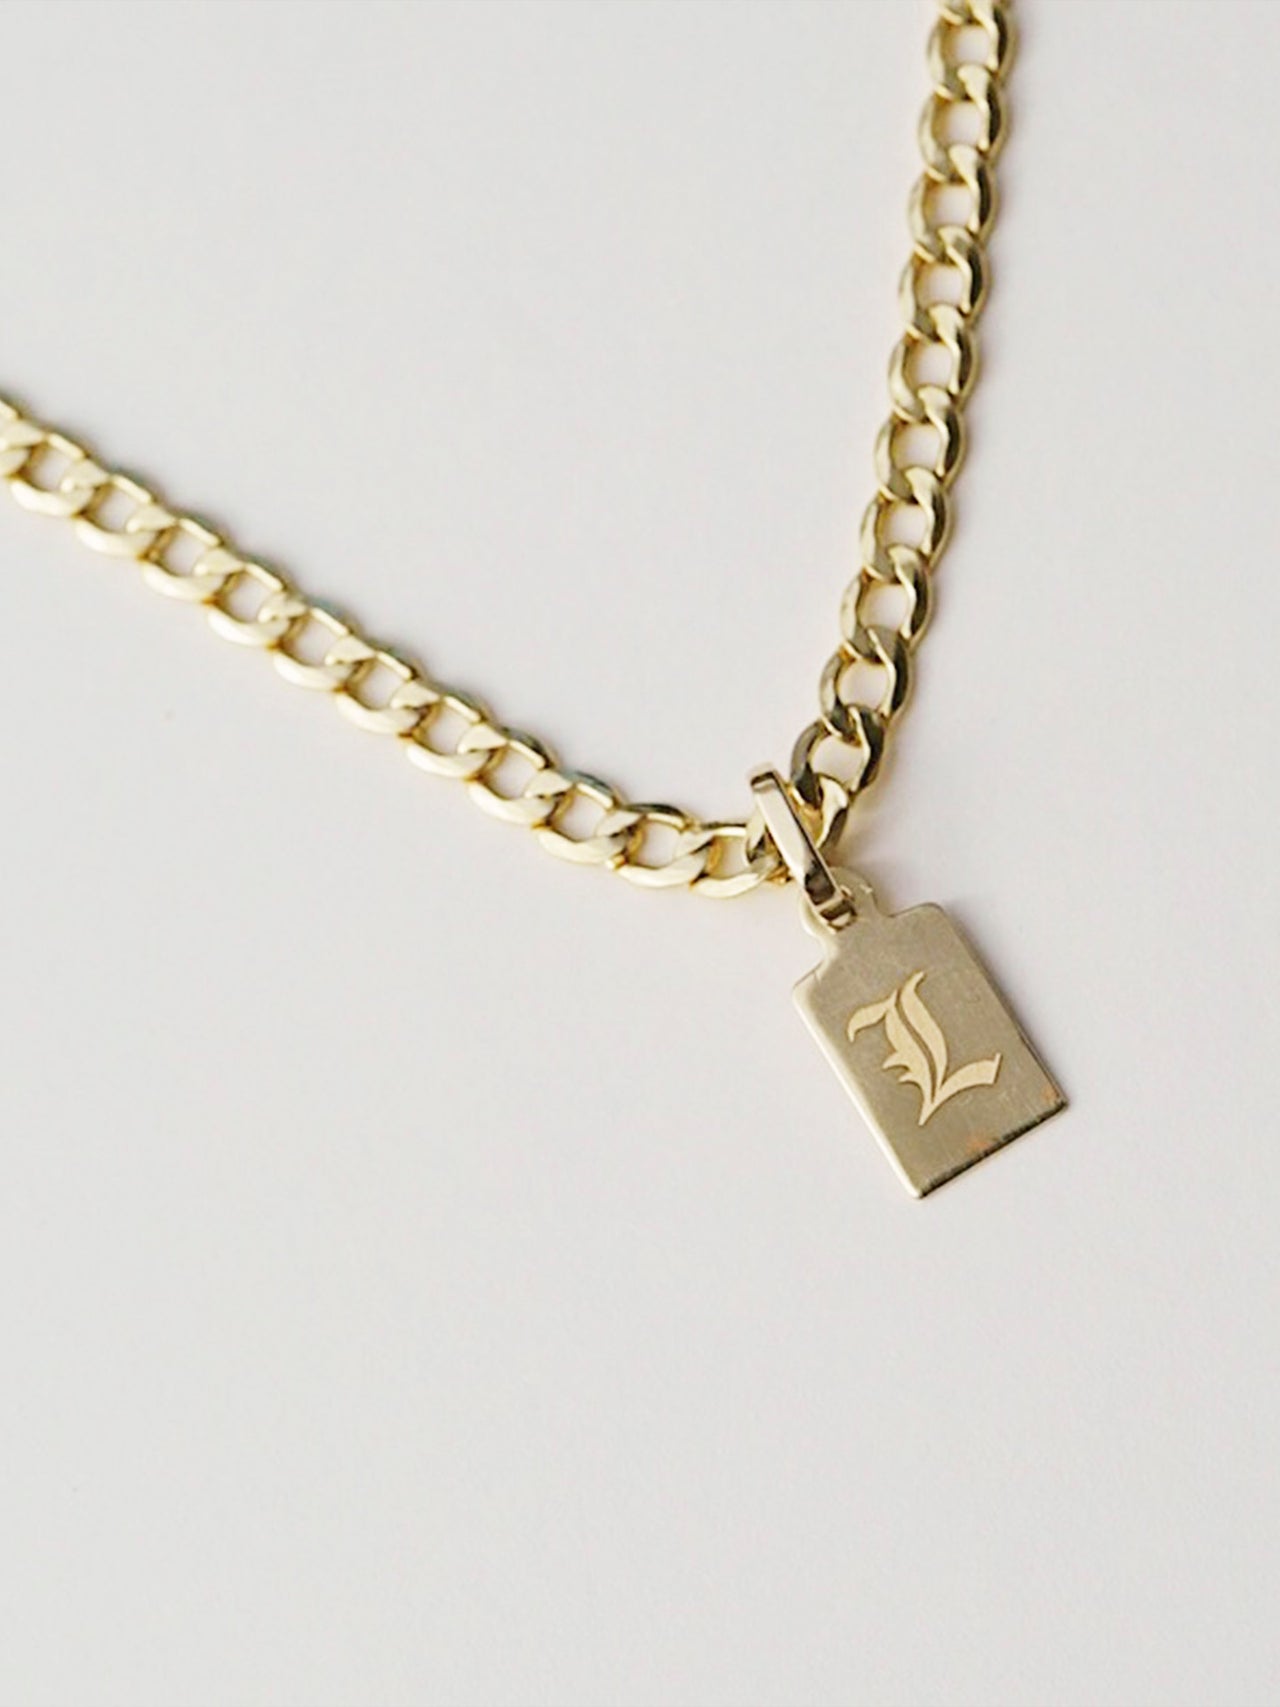 Klint Id Charm Pendant on chain with engraving: "L"